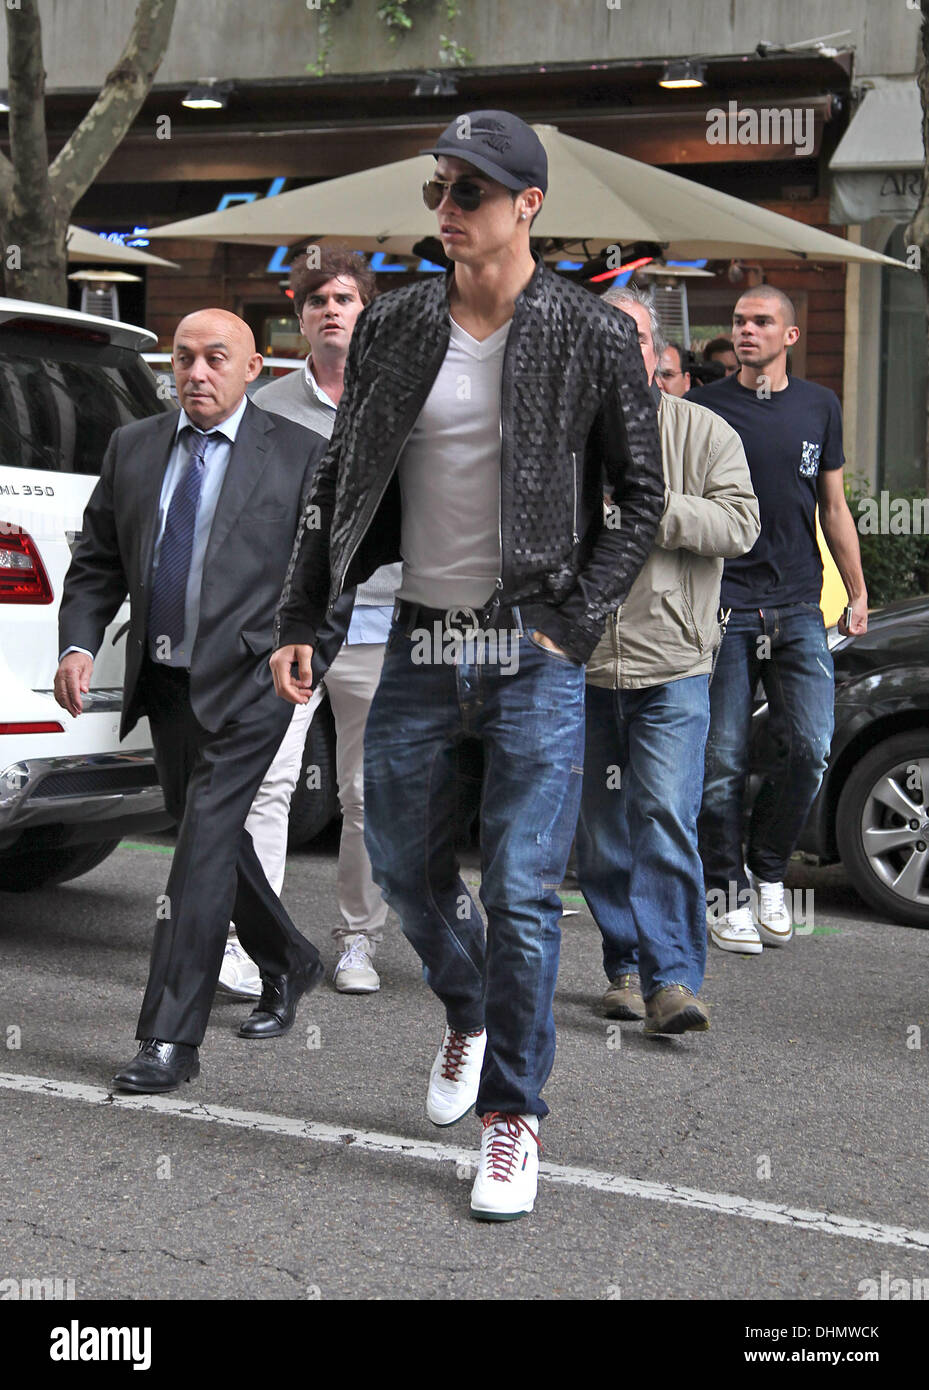 Cristiano Ronaldo Real Madrid players are surrounded by fans leaving a  restaurant after having lunch to celebrate winning their 32nd Spanish  league title Madrid, Spain - 03.05.12 Stock Photo - Alamy